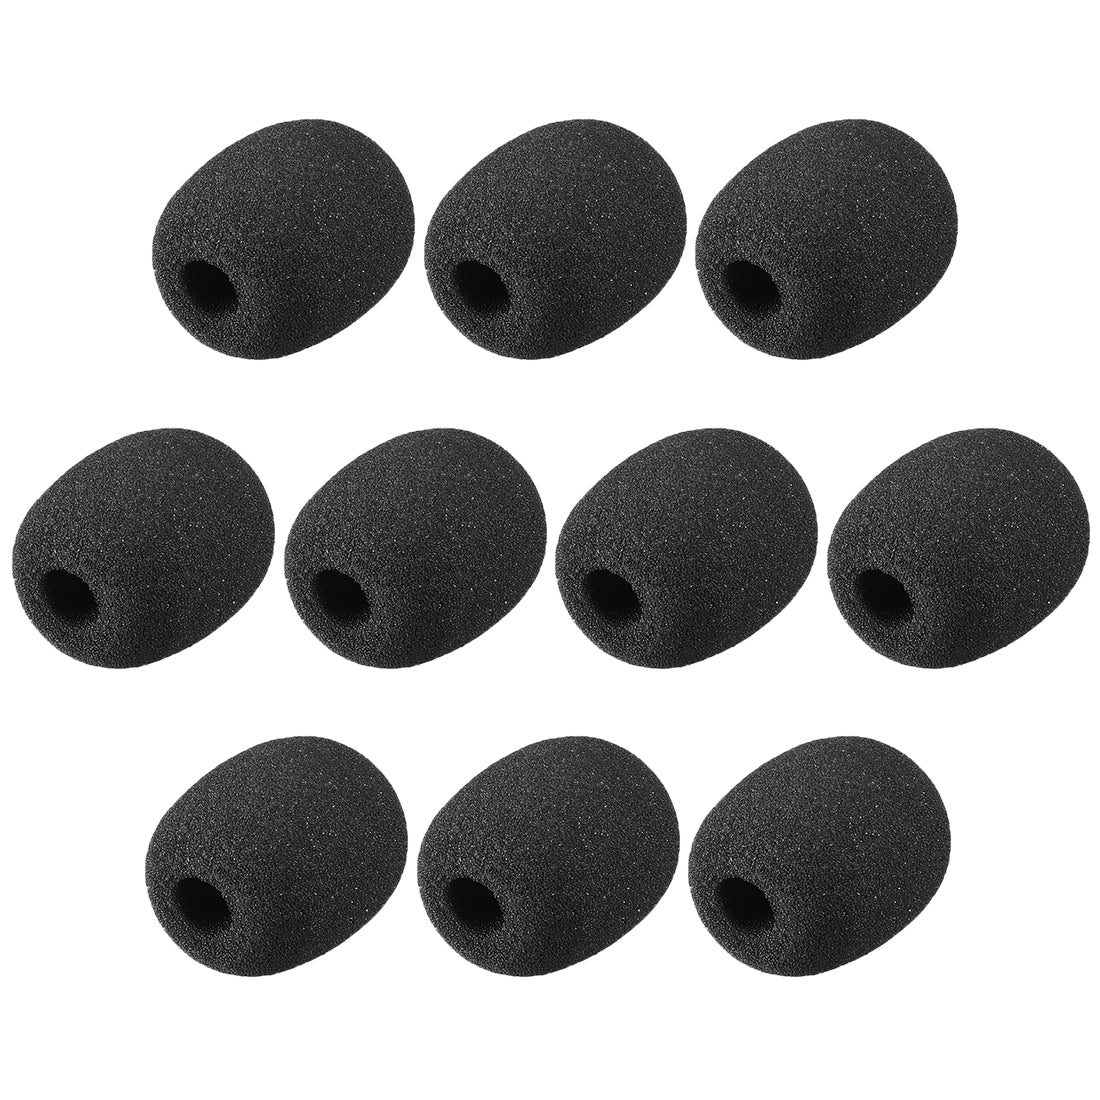 uxcell Uxcell 10PCS Foam Mic Cover Microphone Windscreen Shield Protection Black 41mm Length for Headset